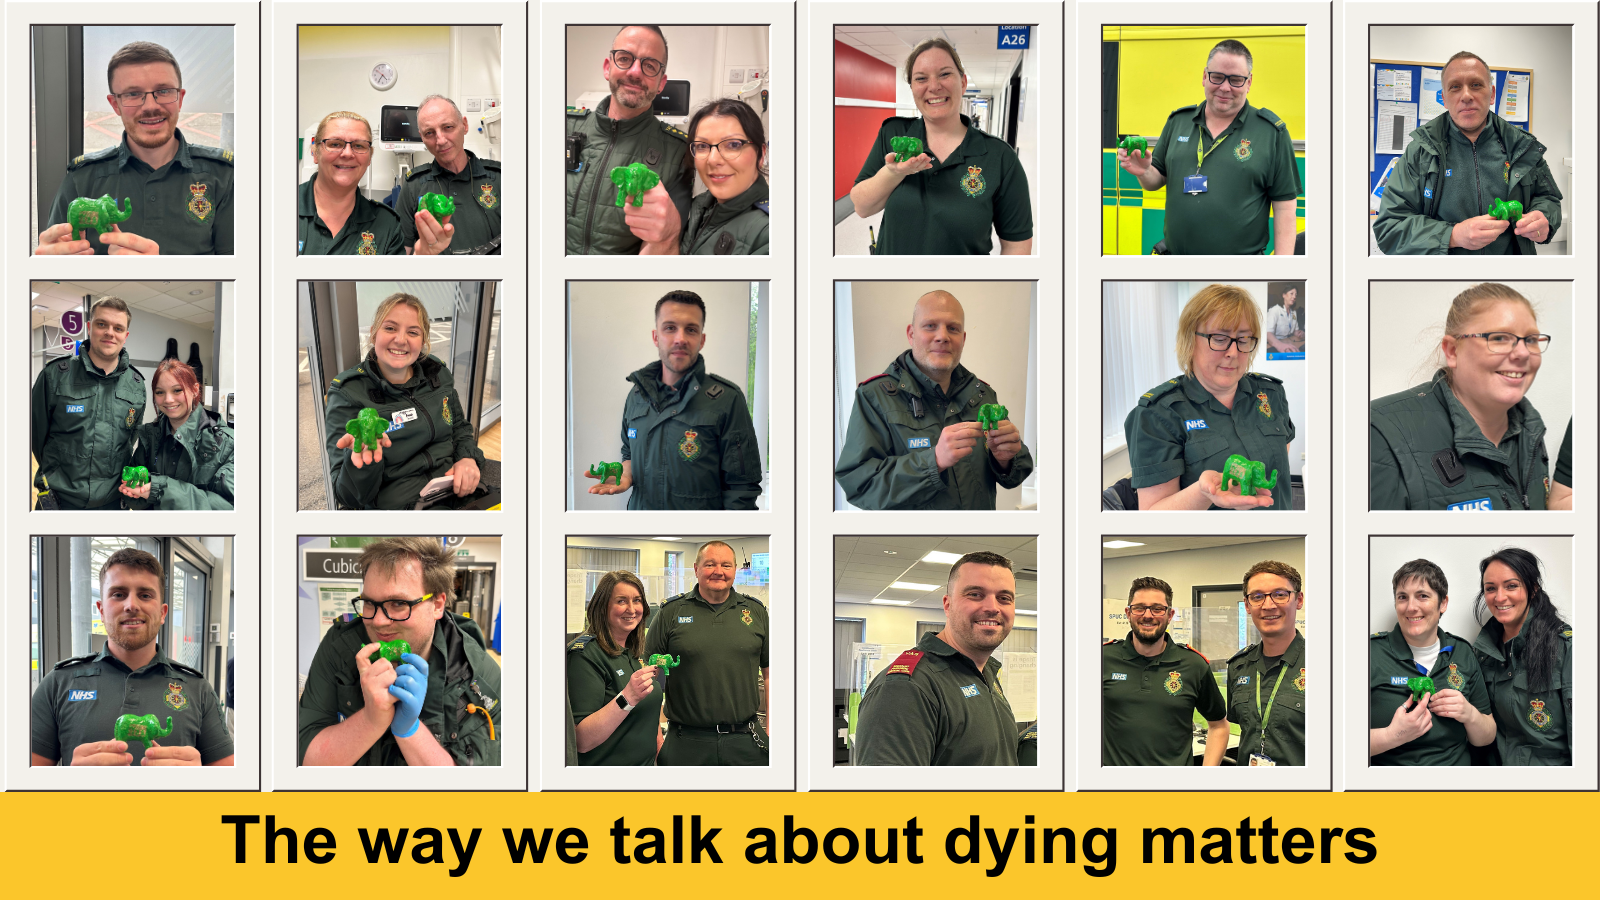 Eighteen individual photos of ambulance staff holding a toy elephant to illustrate how they are confronting the elephant in the room and opening up conversations about death and dying